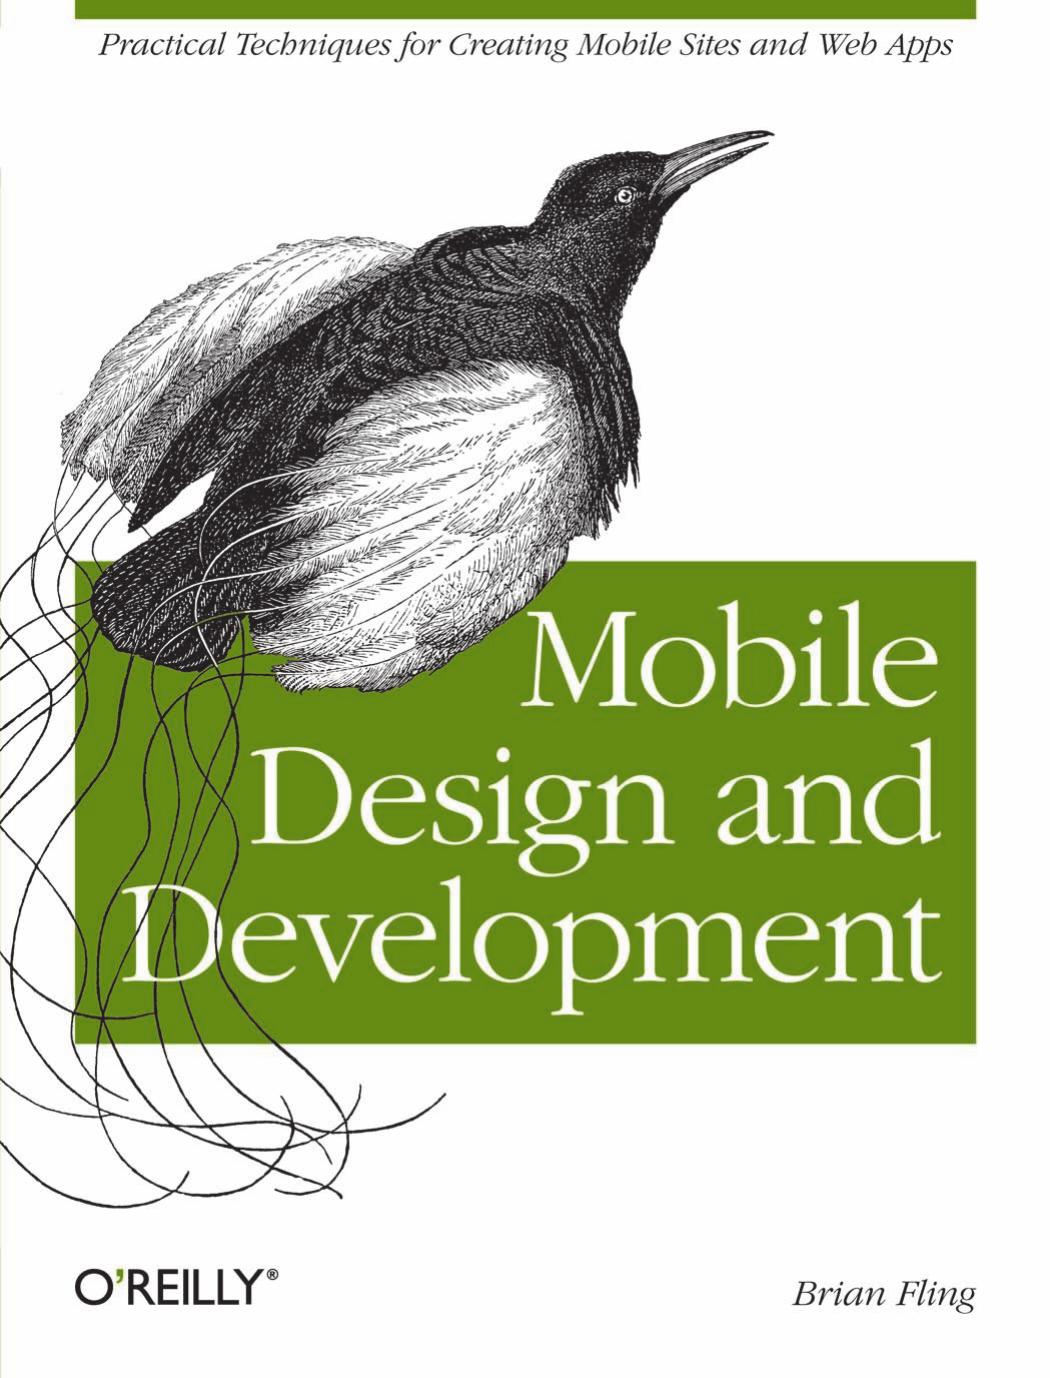 Mobile Design and Development: Practical Concepts and Techniques for Creating Mobile Sites and Web Apps